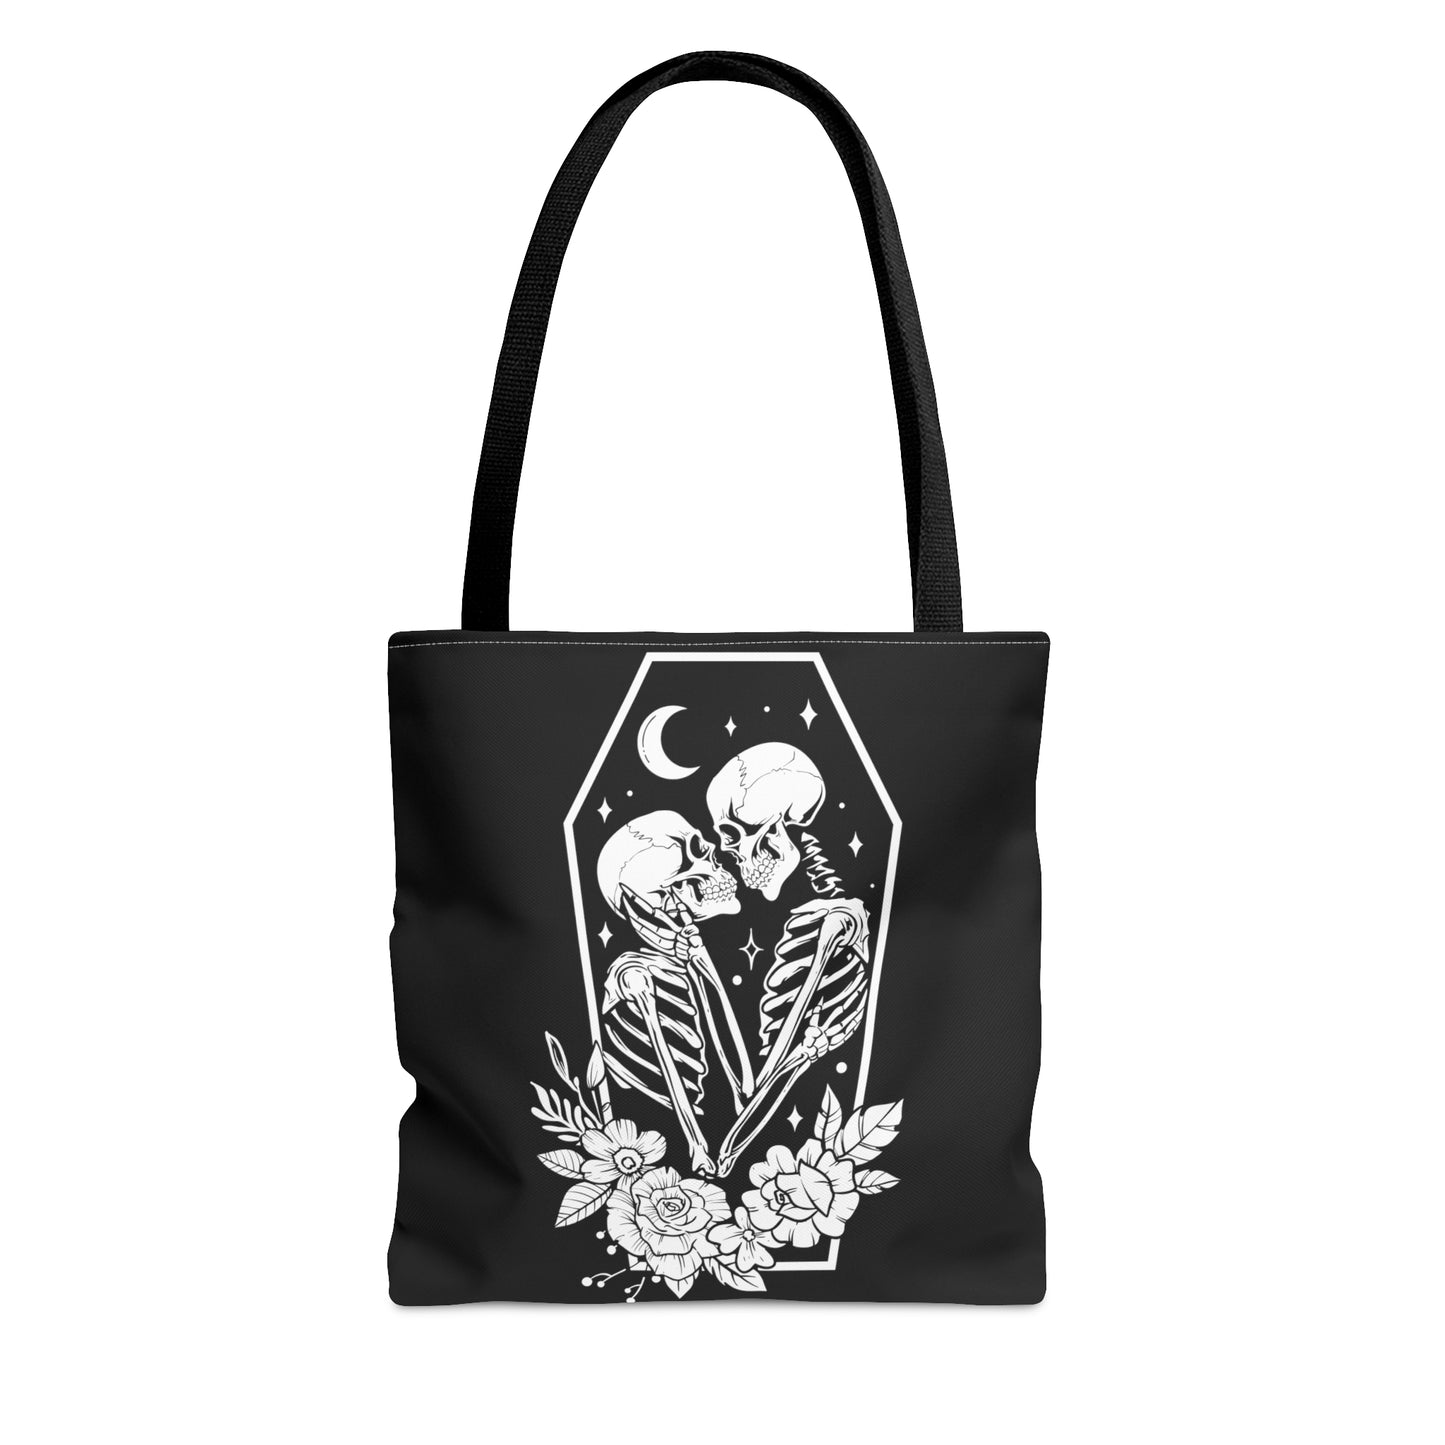 The Lovers Coffin Tote Bag